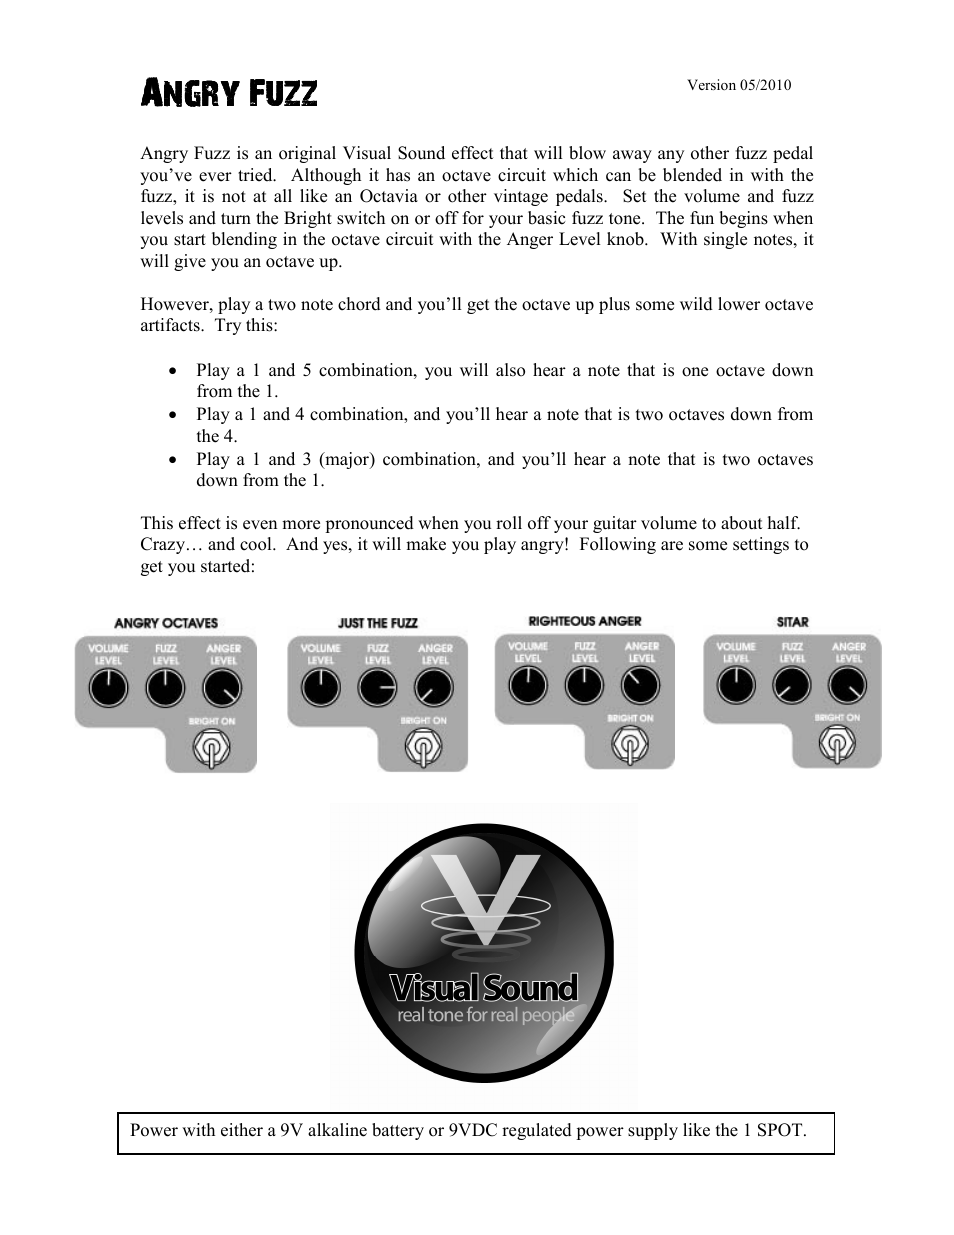 Visual Sound V2 Angry Fuzz User Manual | 1 page